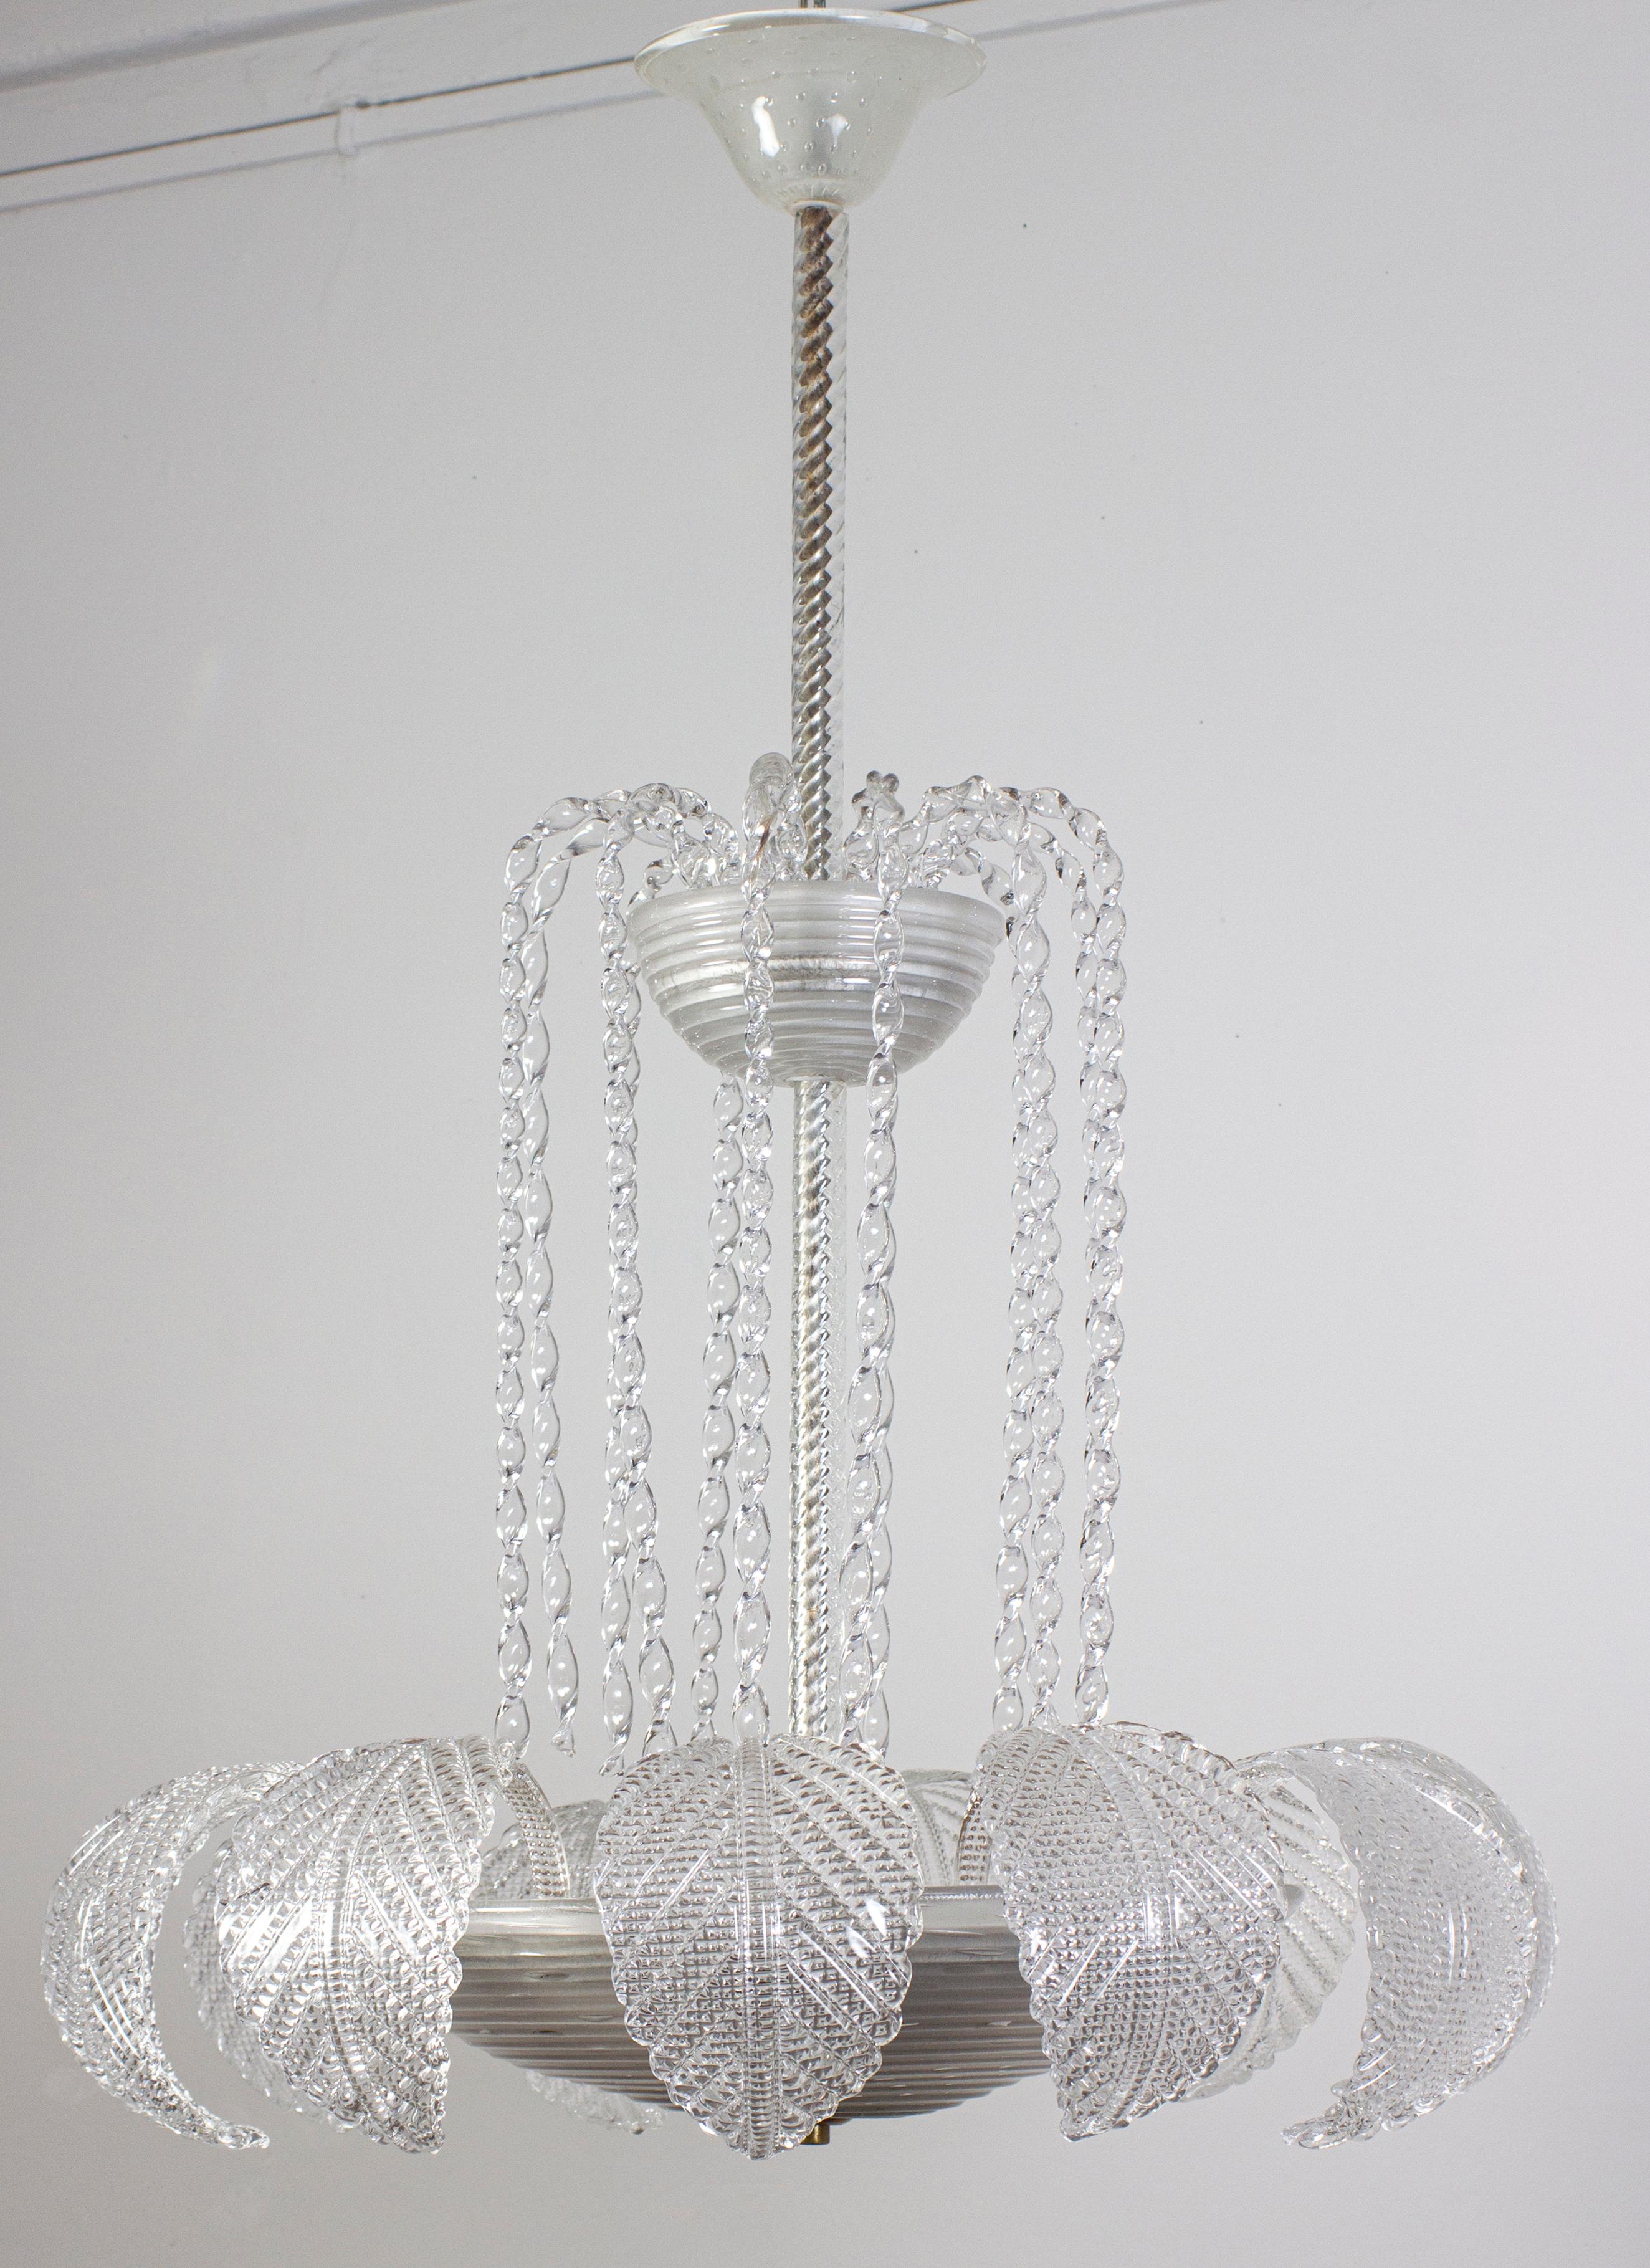 Overwhelming  Art Deco Ninfea Murano Glass Chandelier by Barovier Italy, 1940 For Sale 3